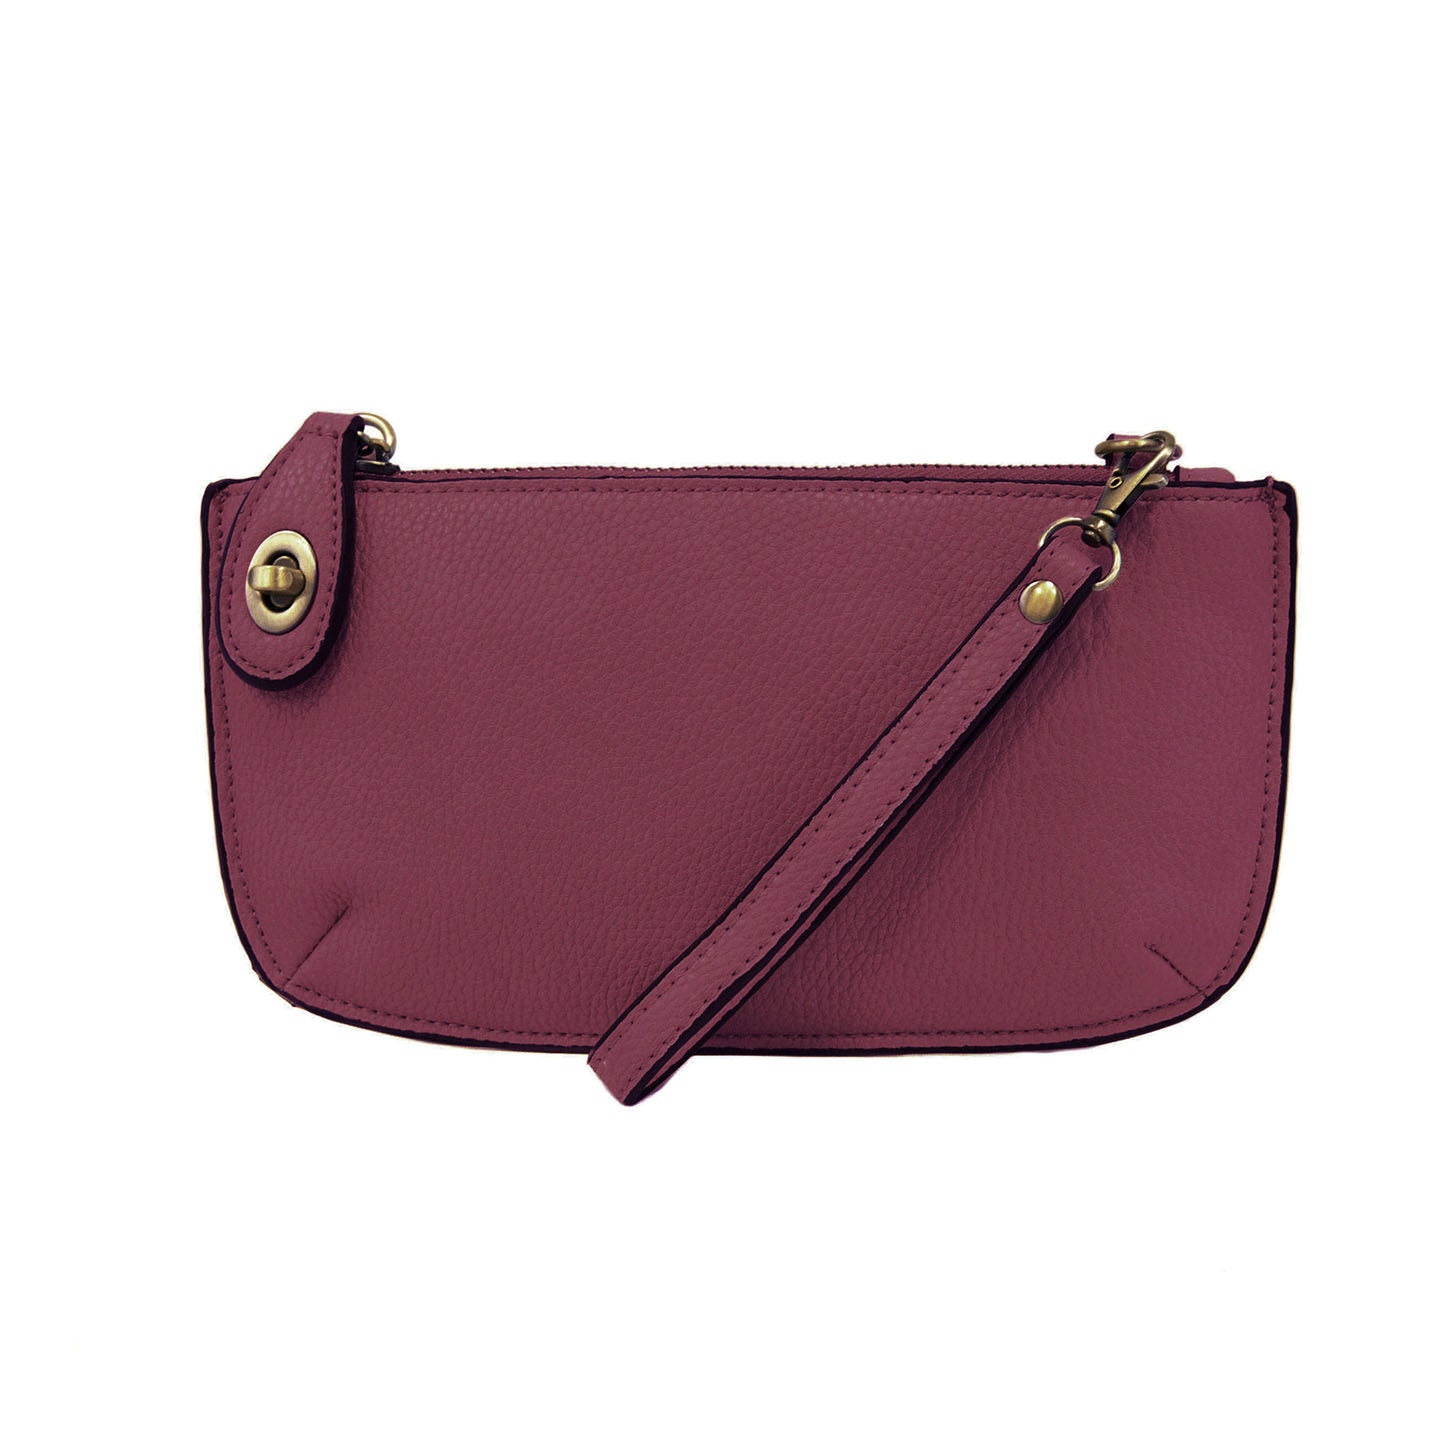 owned limited edition mini Pochette Accessoires clutch - M41534